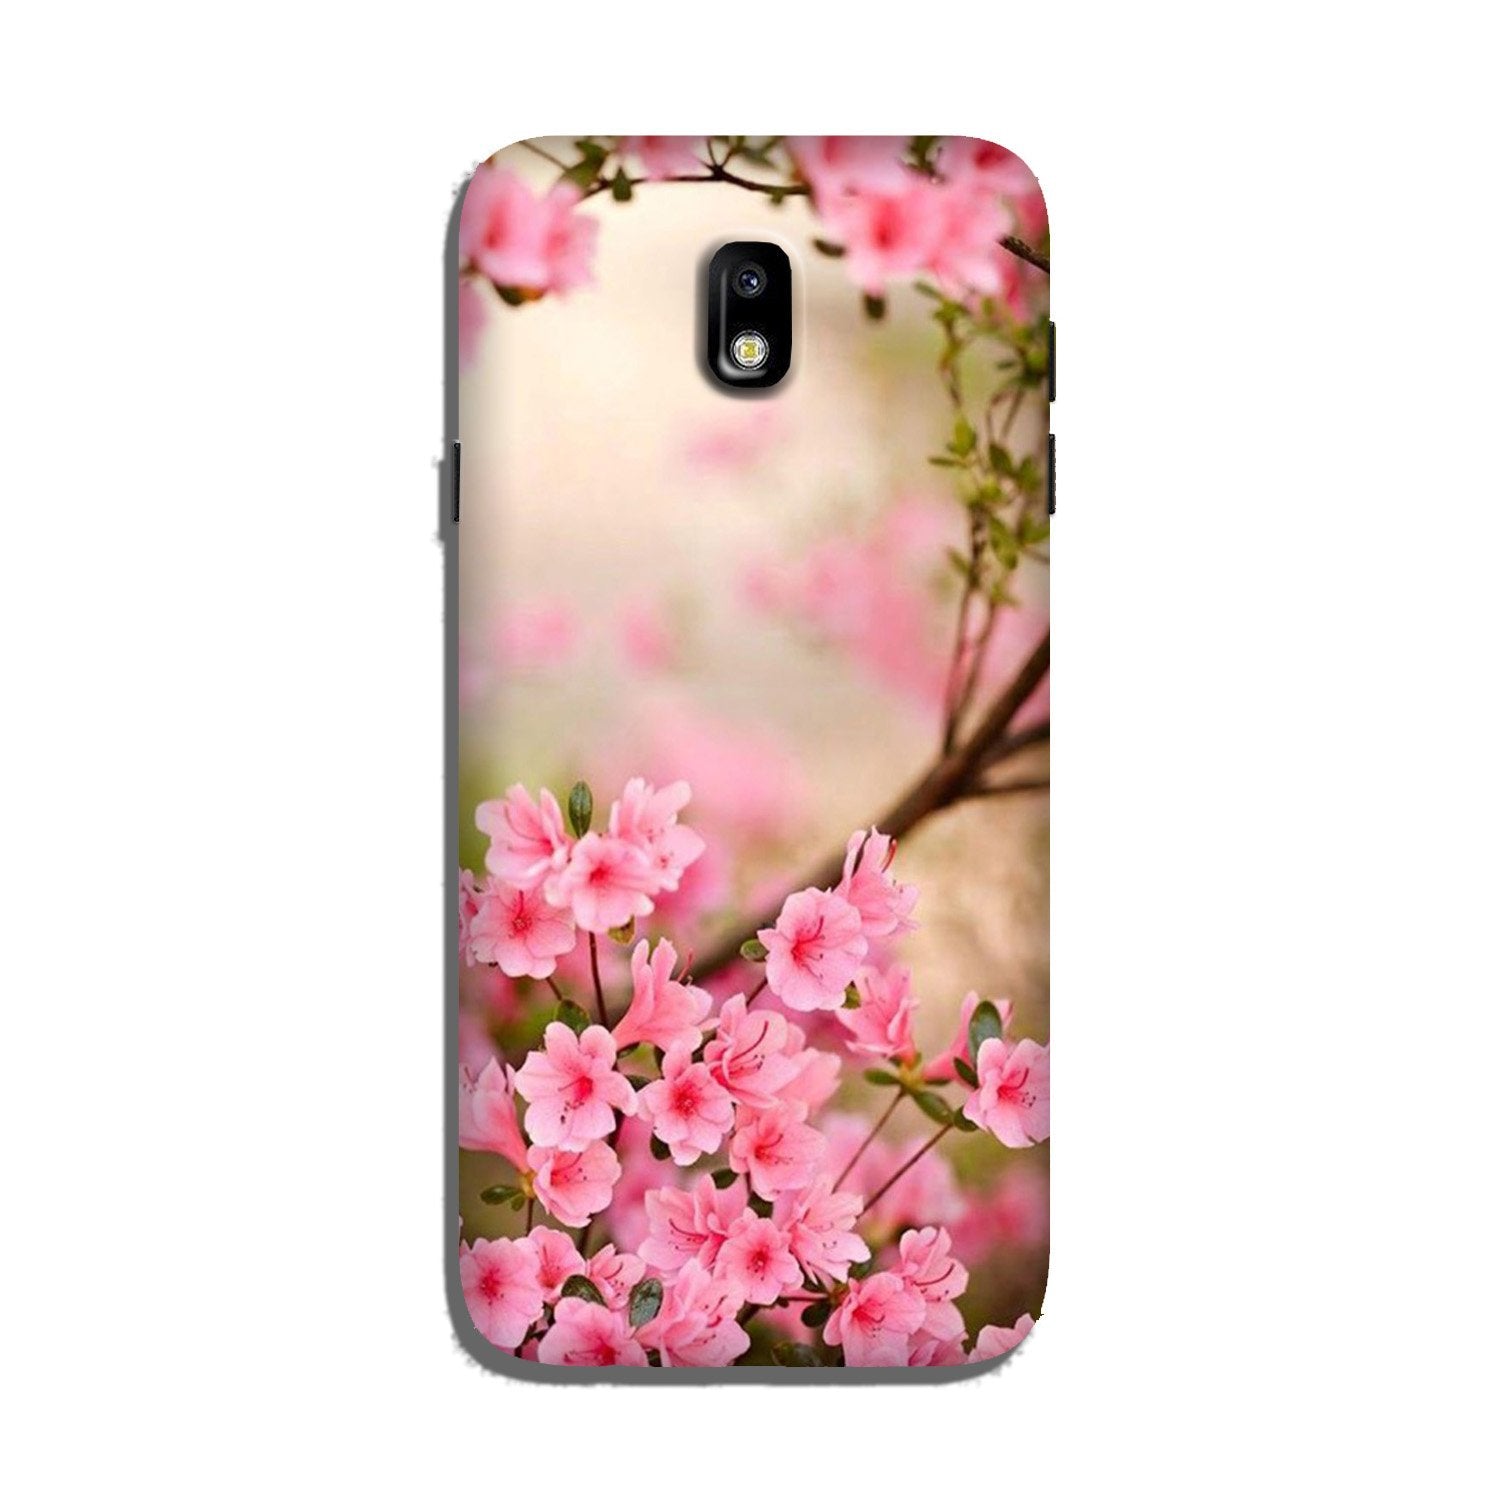 Pink flowers Case for Galaxy J5 Pro